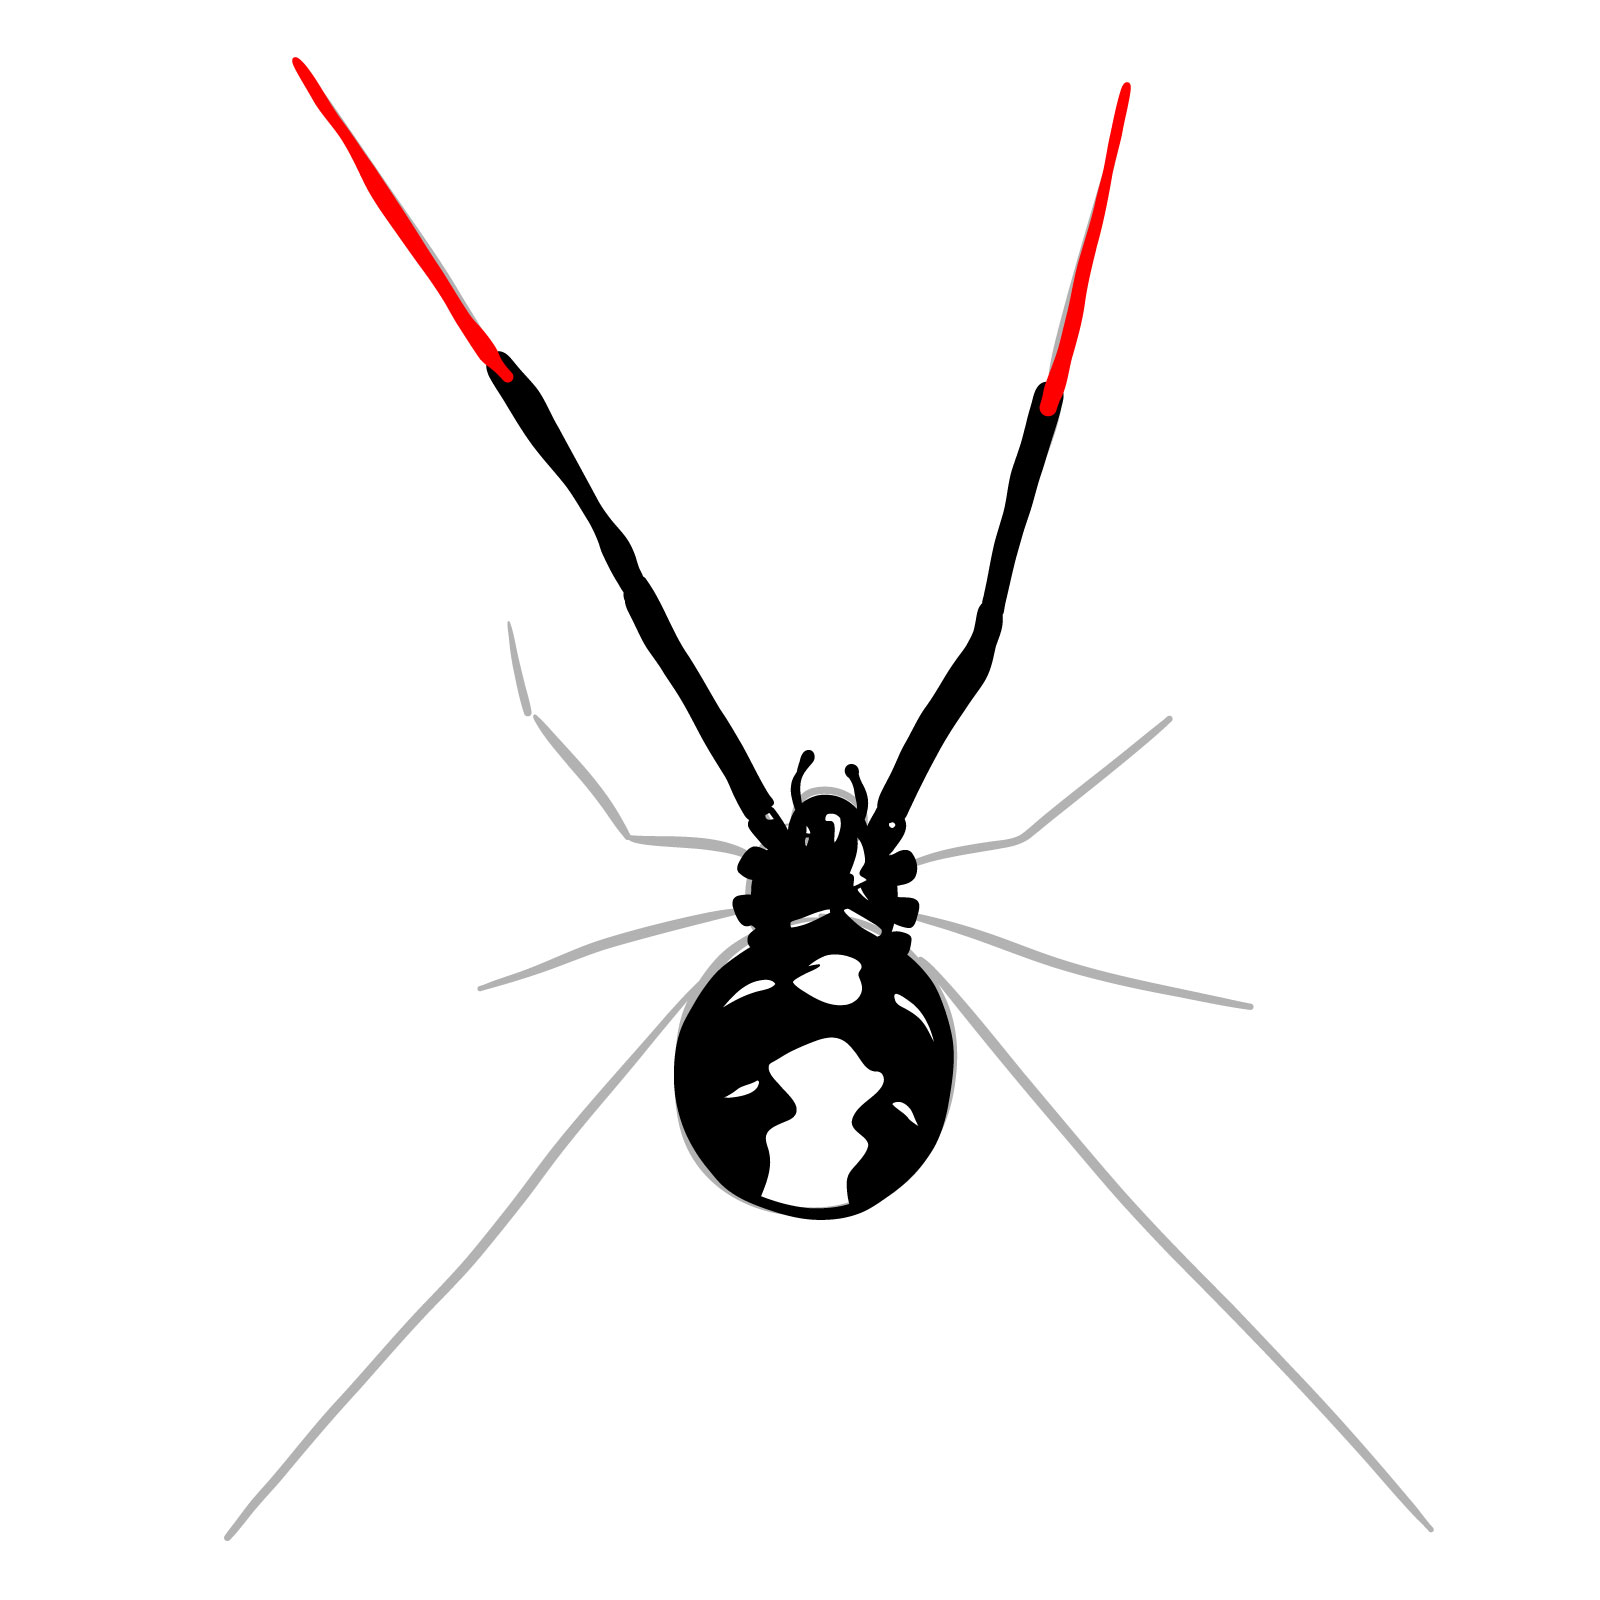 How to draw a Black Widow Spider - step 13